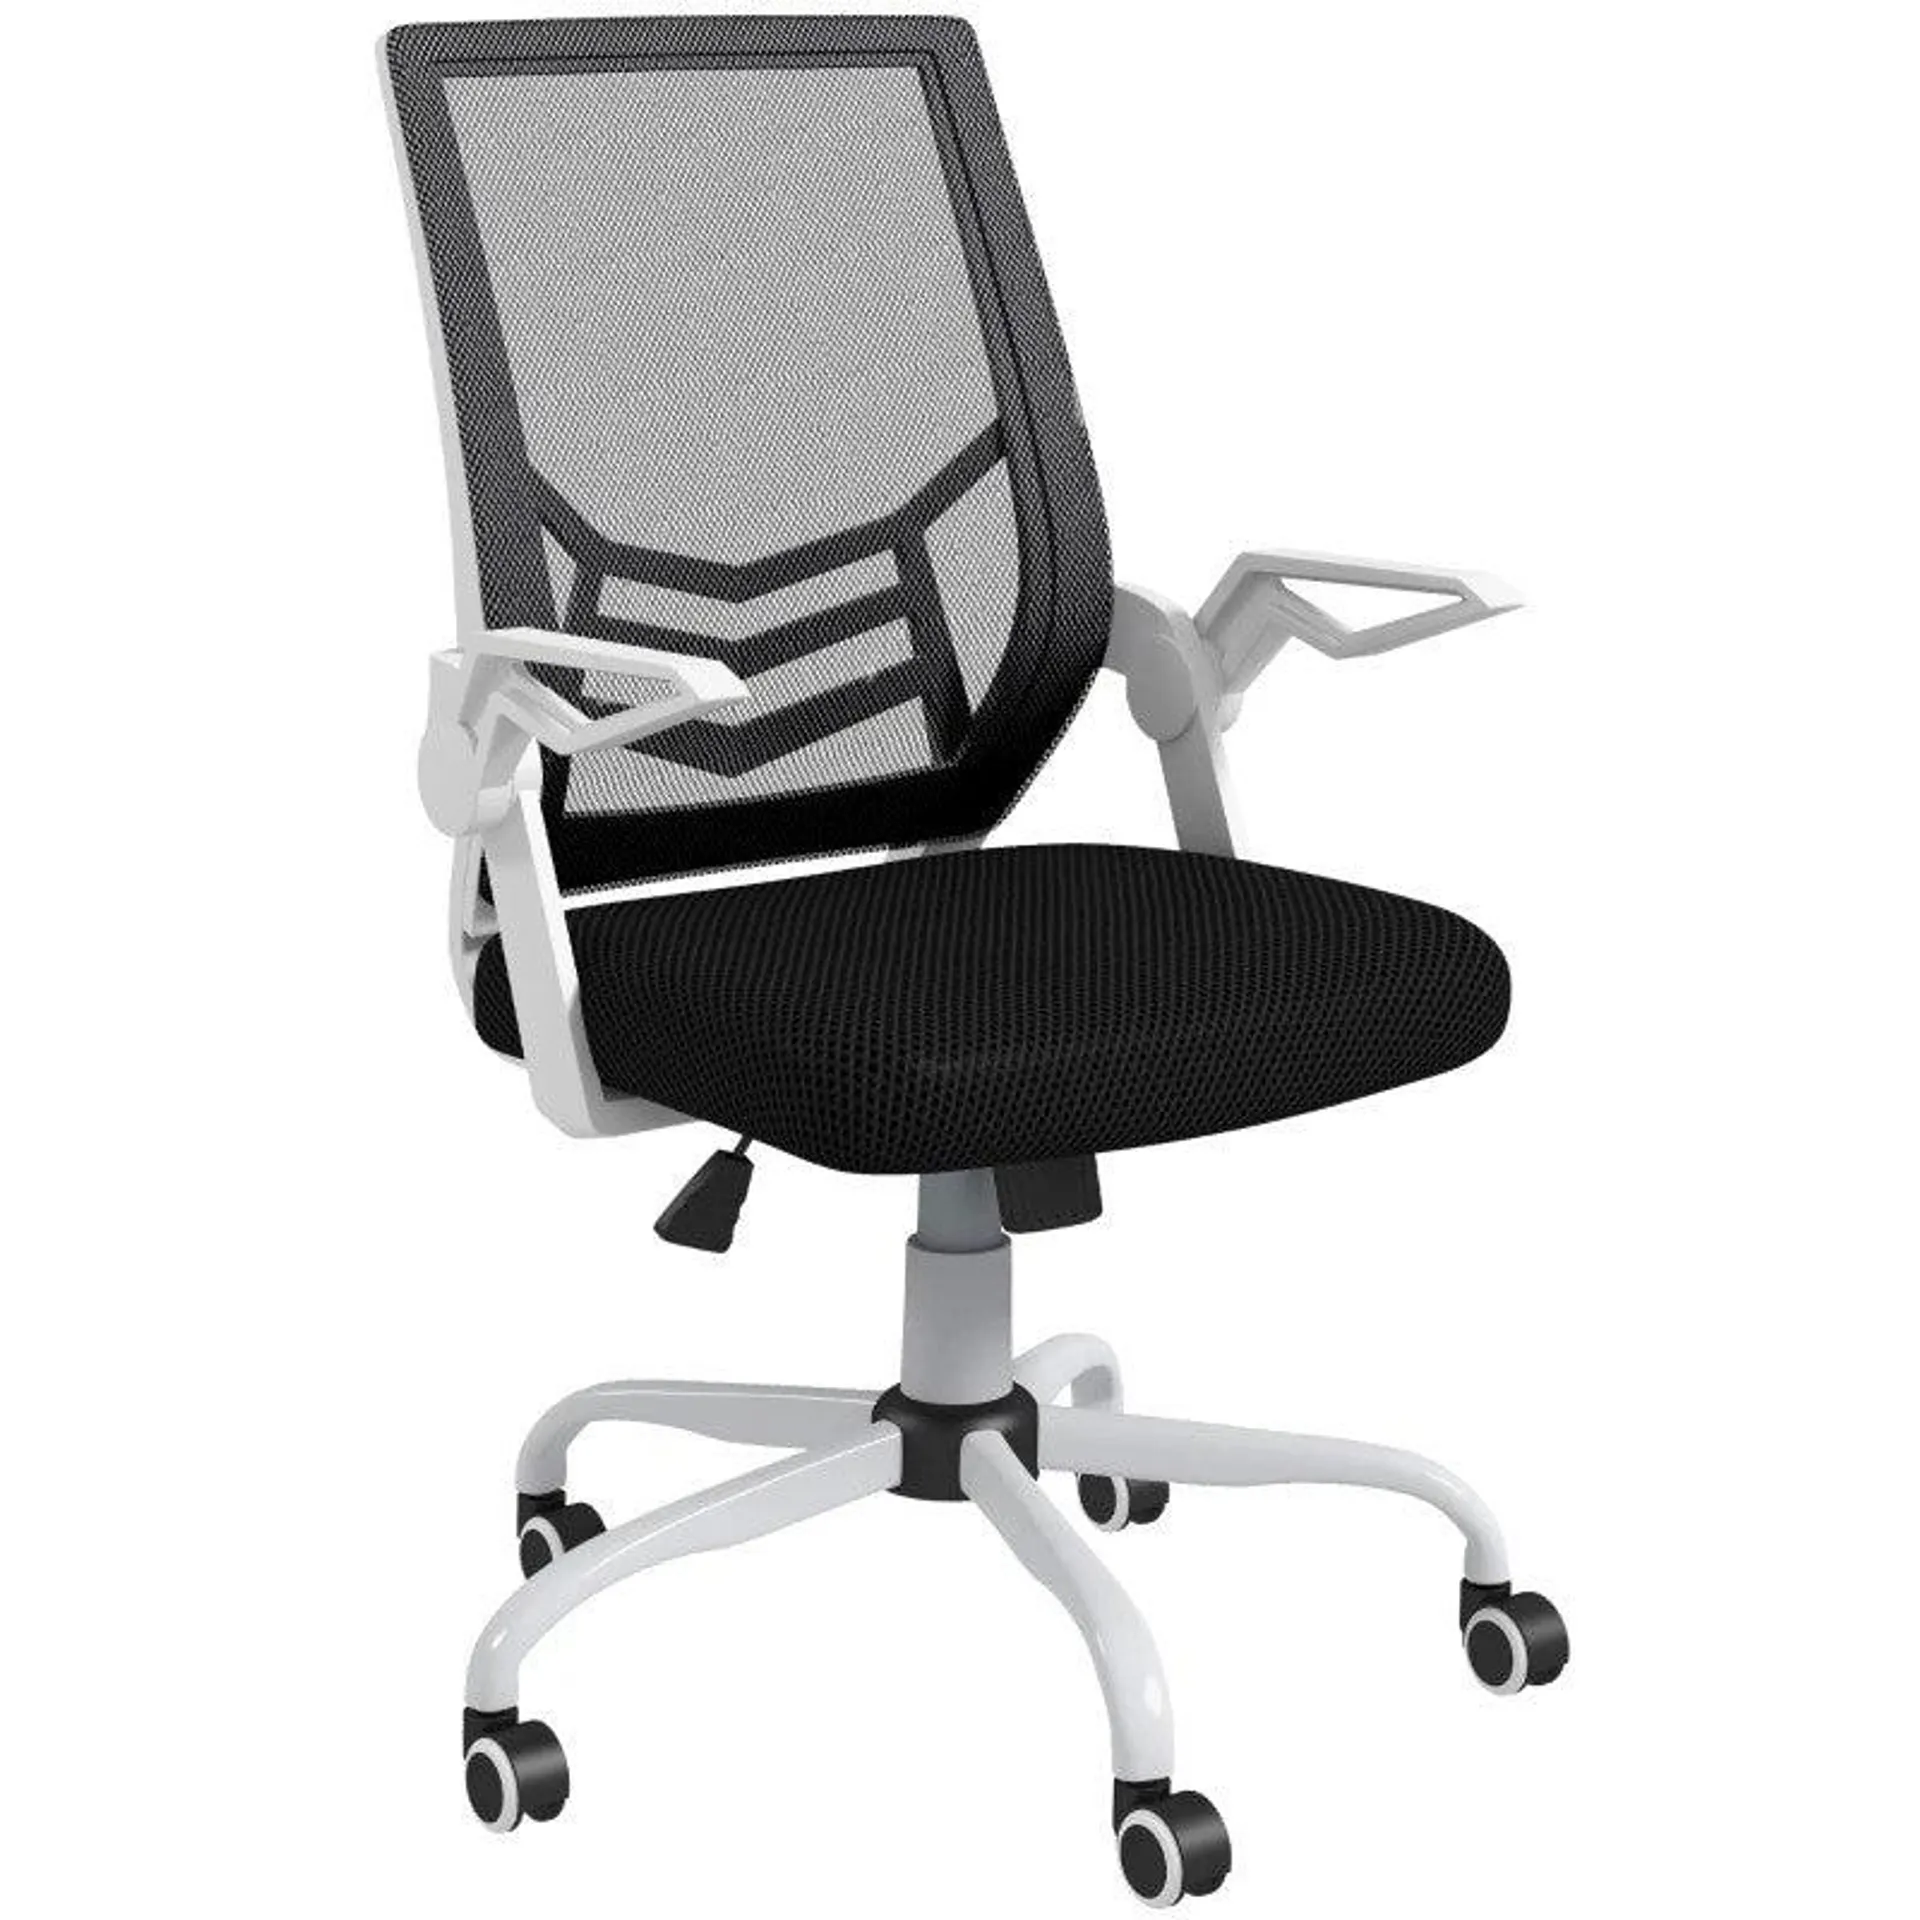 ProperAV Extra Ergonomic Adjustable Office Chair with Flip-up Arm & Lumbar Back Support